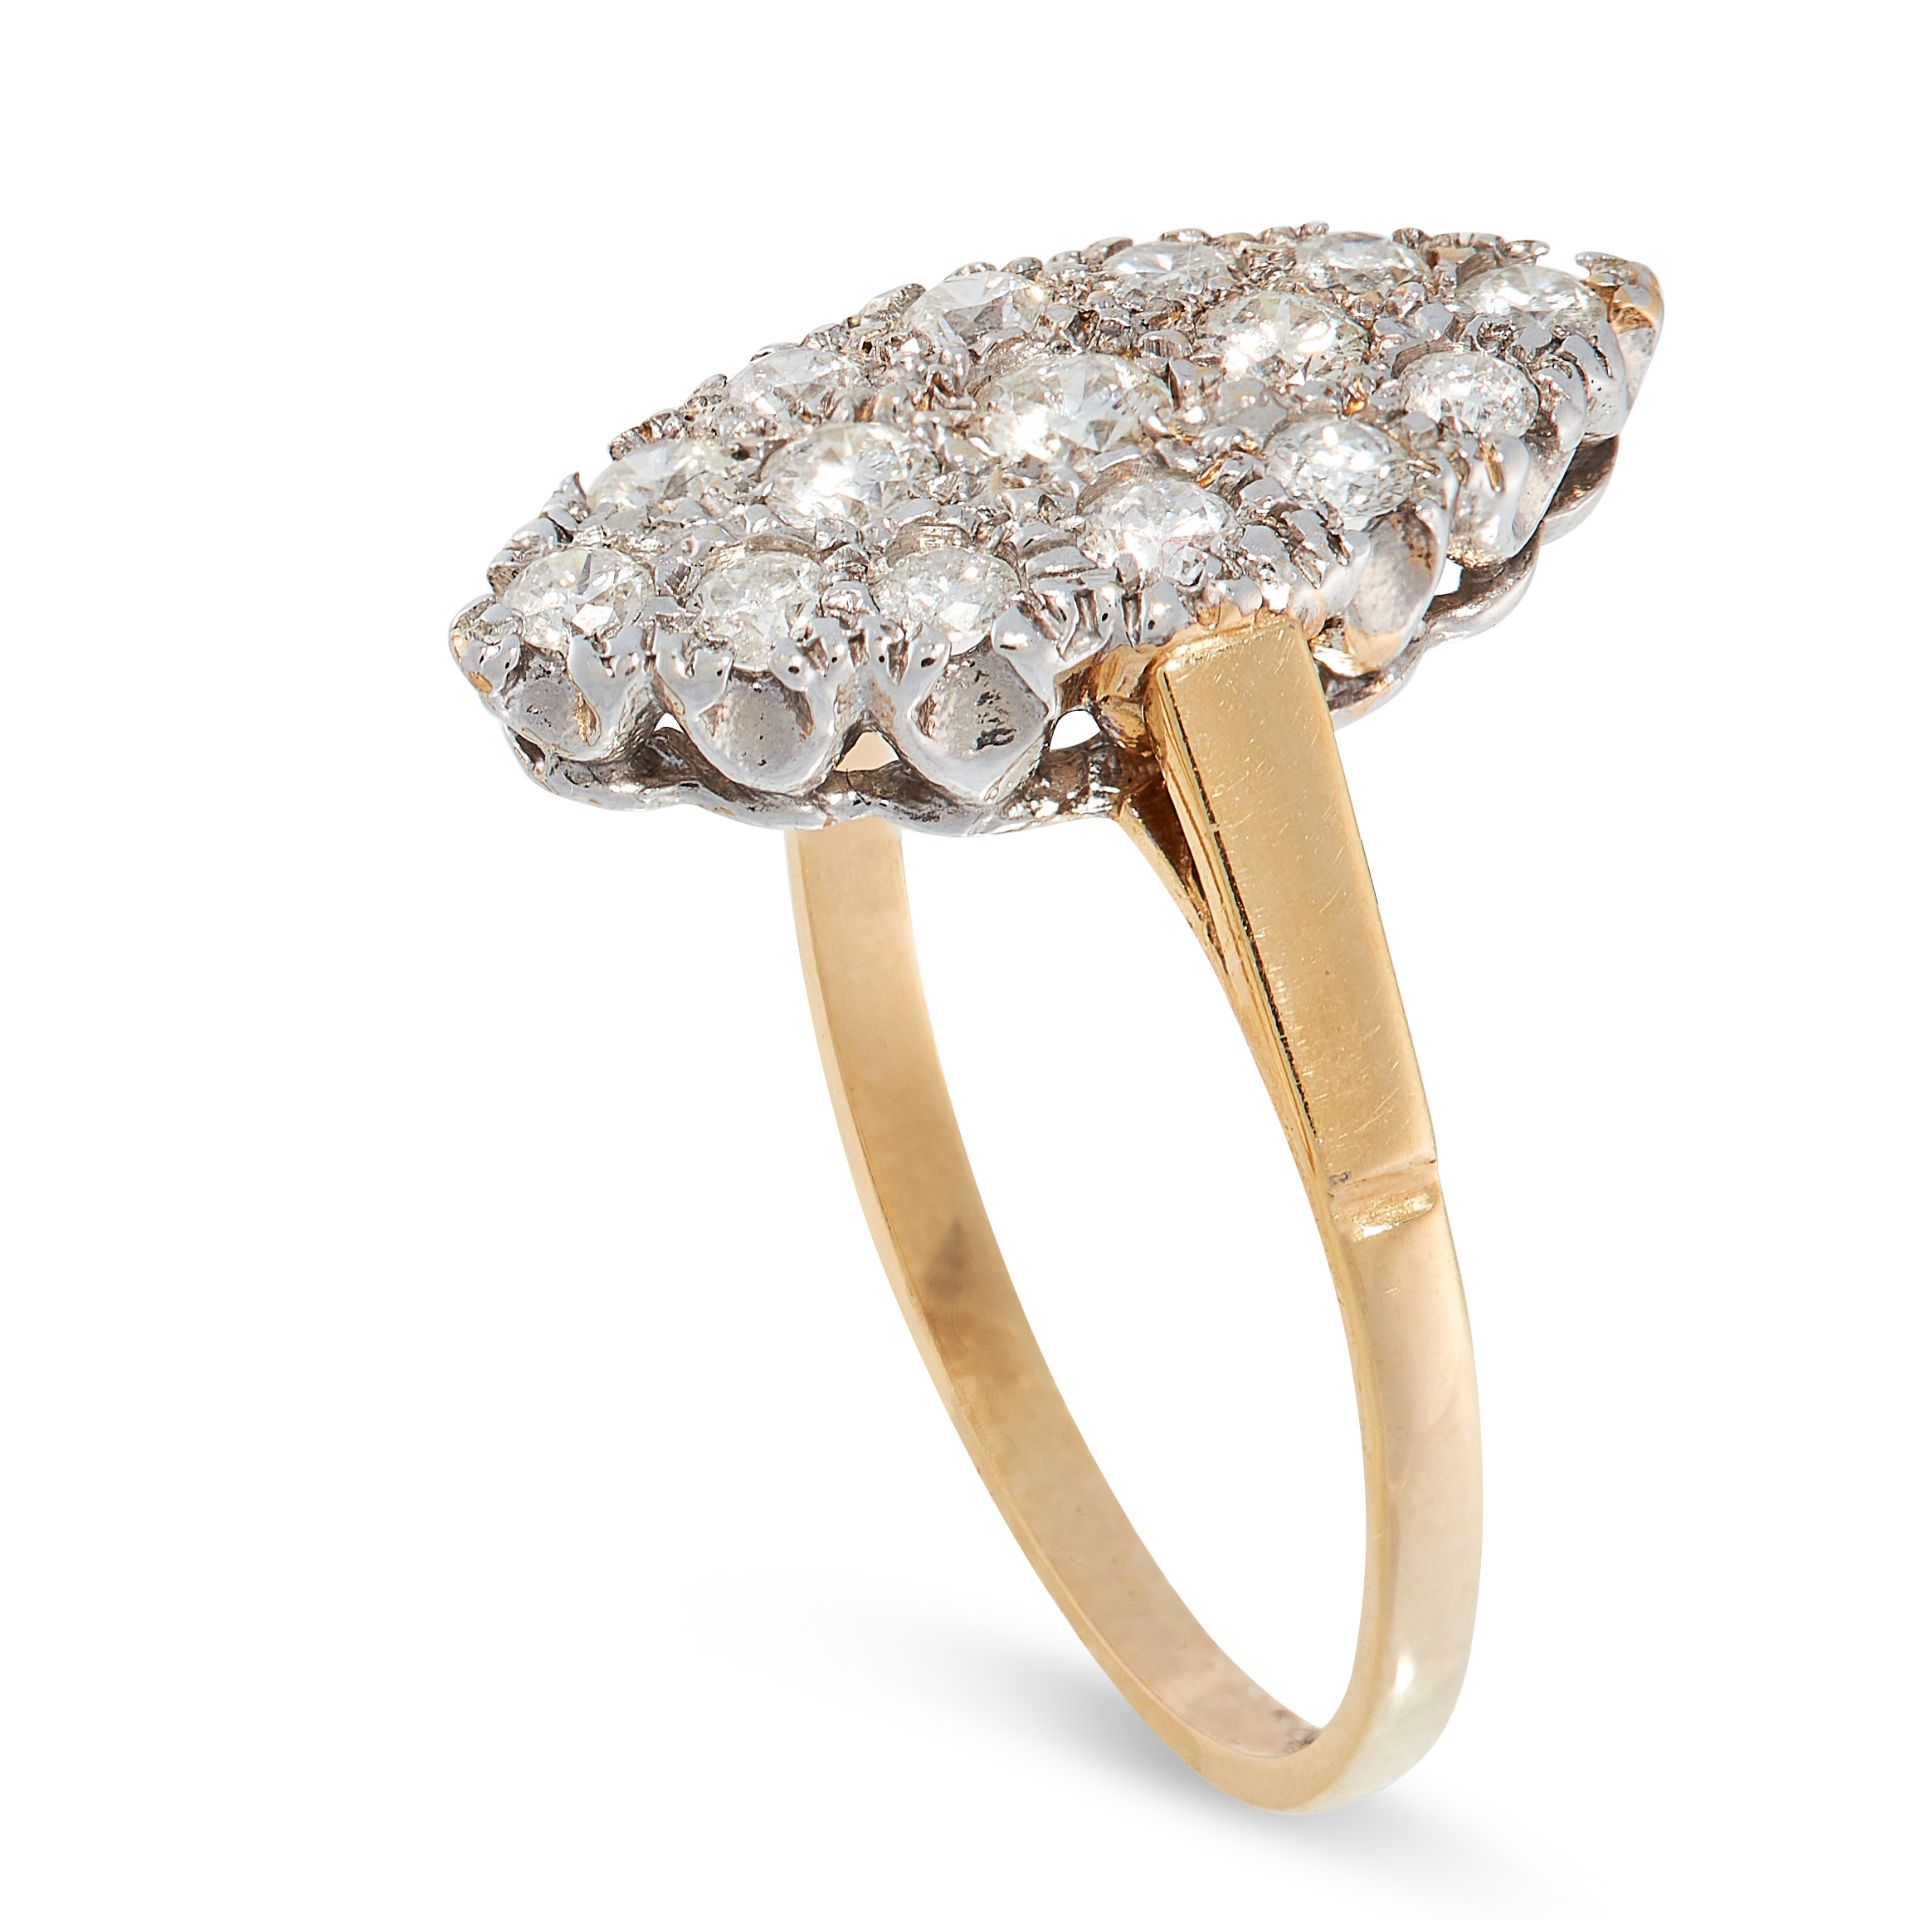 NO RESERVE - A DIAMOND NAVETTE RING in 18ct yellow gold, the navette face pave set with round bri... - Image 2 of 2